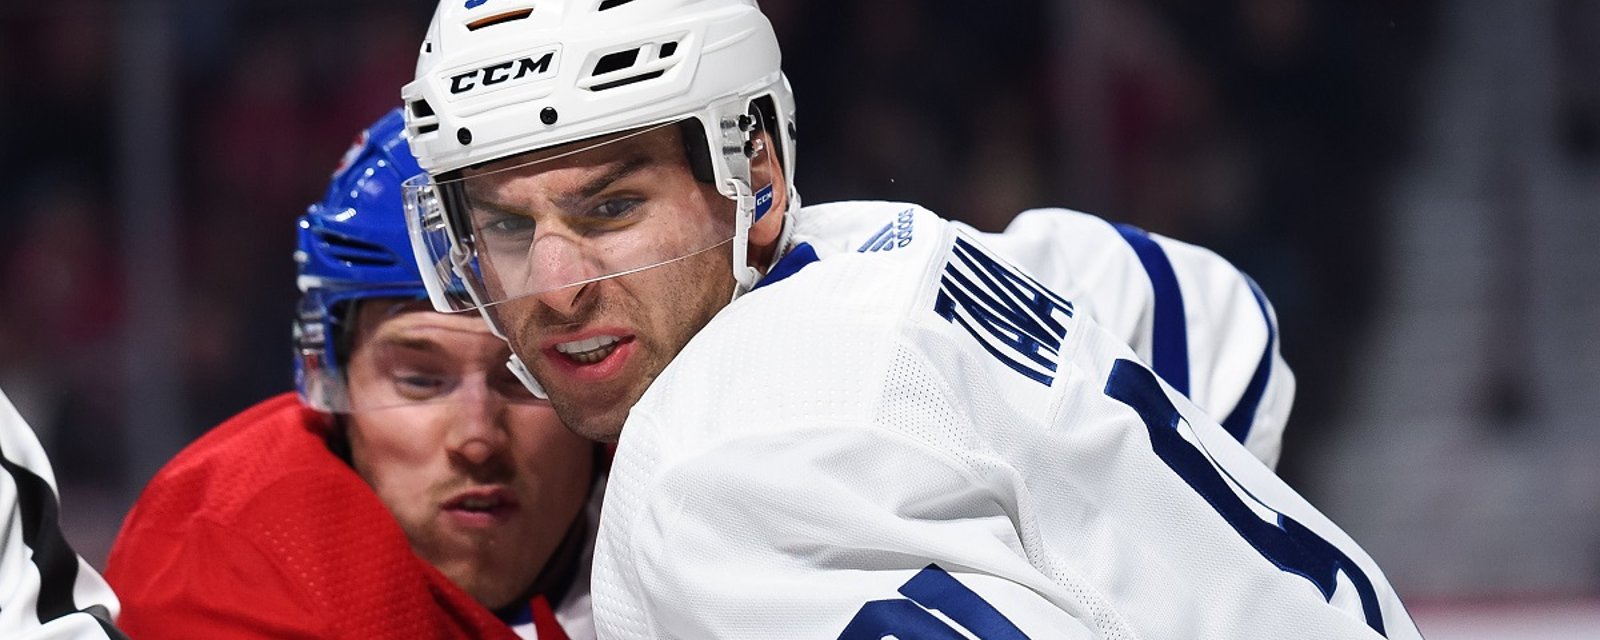 Leafs and Habs lock in their line ups for Saturday night's big matchup.